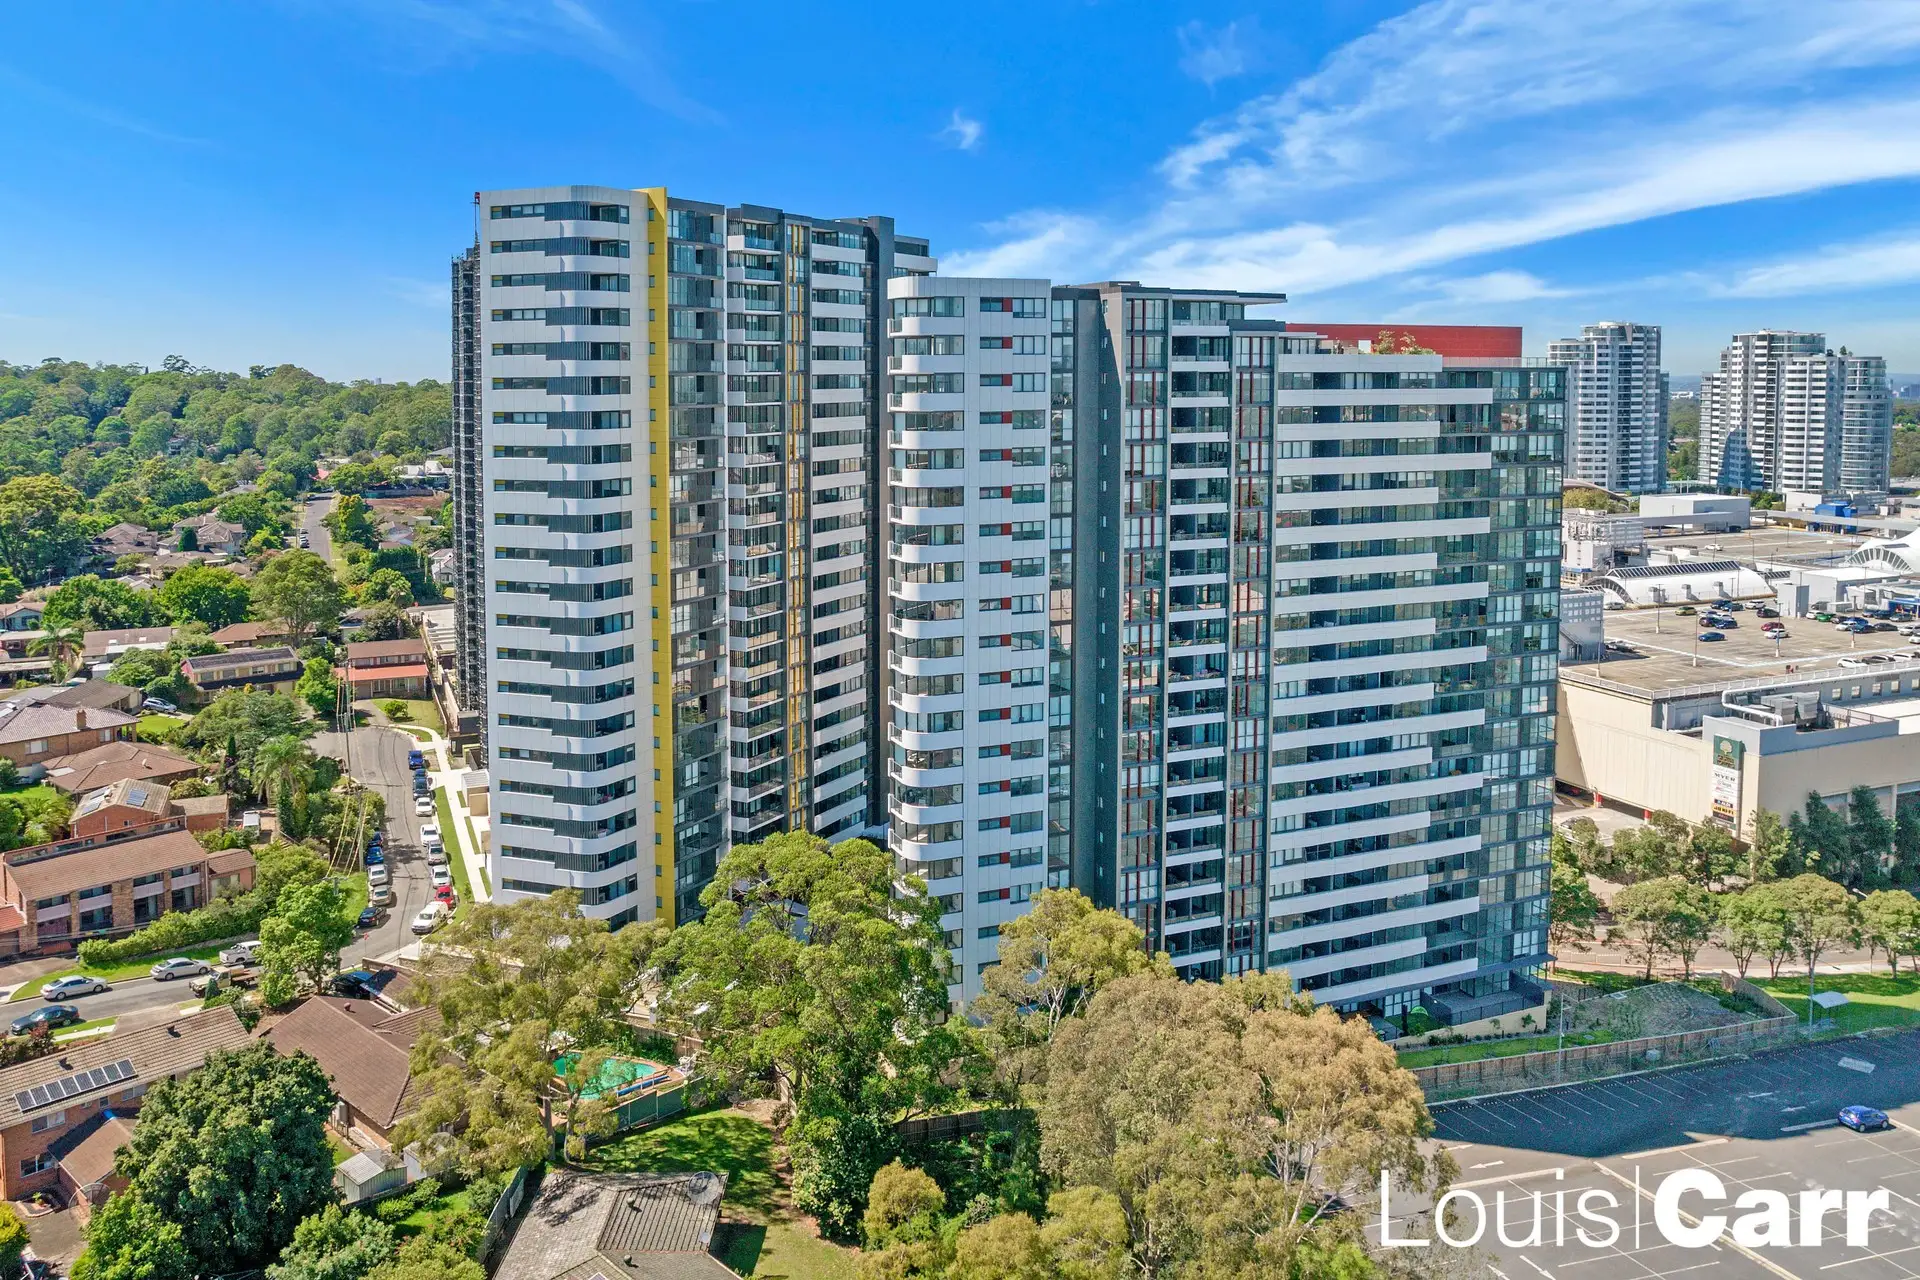 Photo #9: 1107/9 Gay Street, Castle Hill - Sold by Louis Carr Real Estate